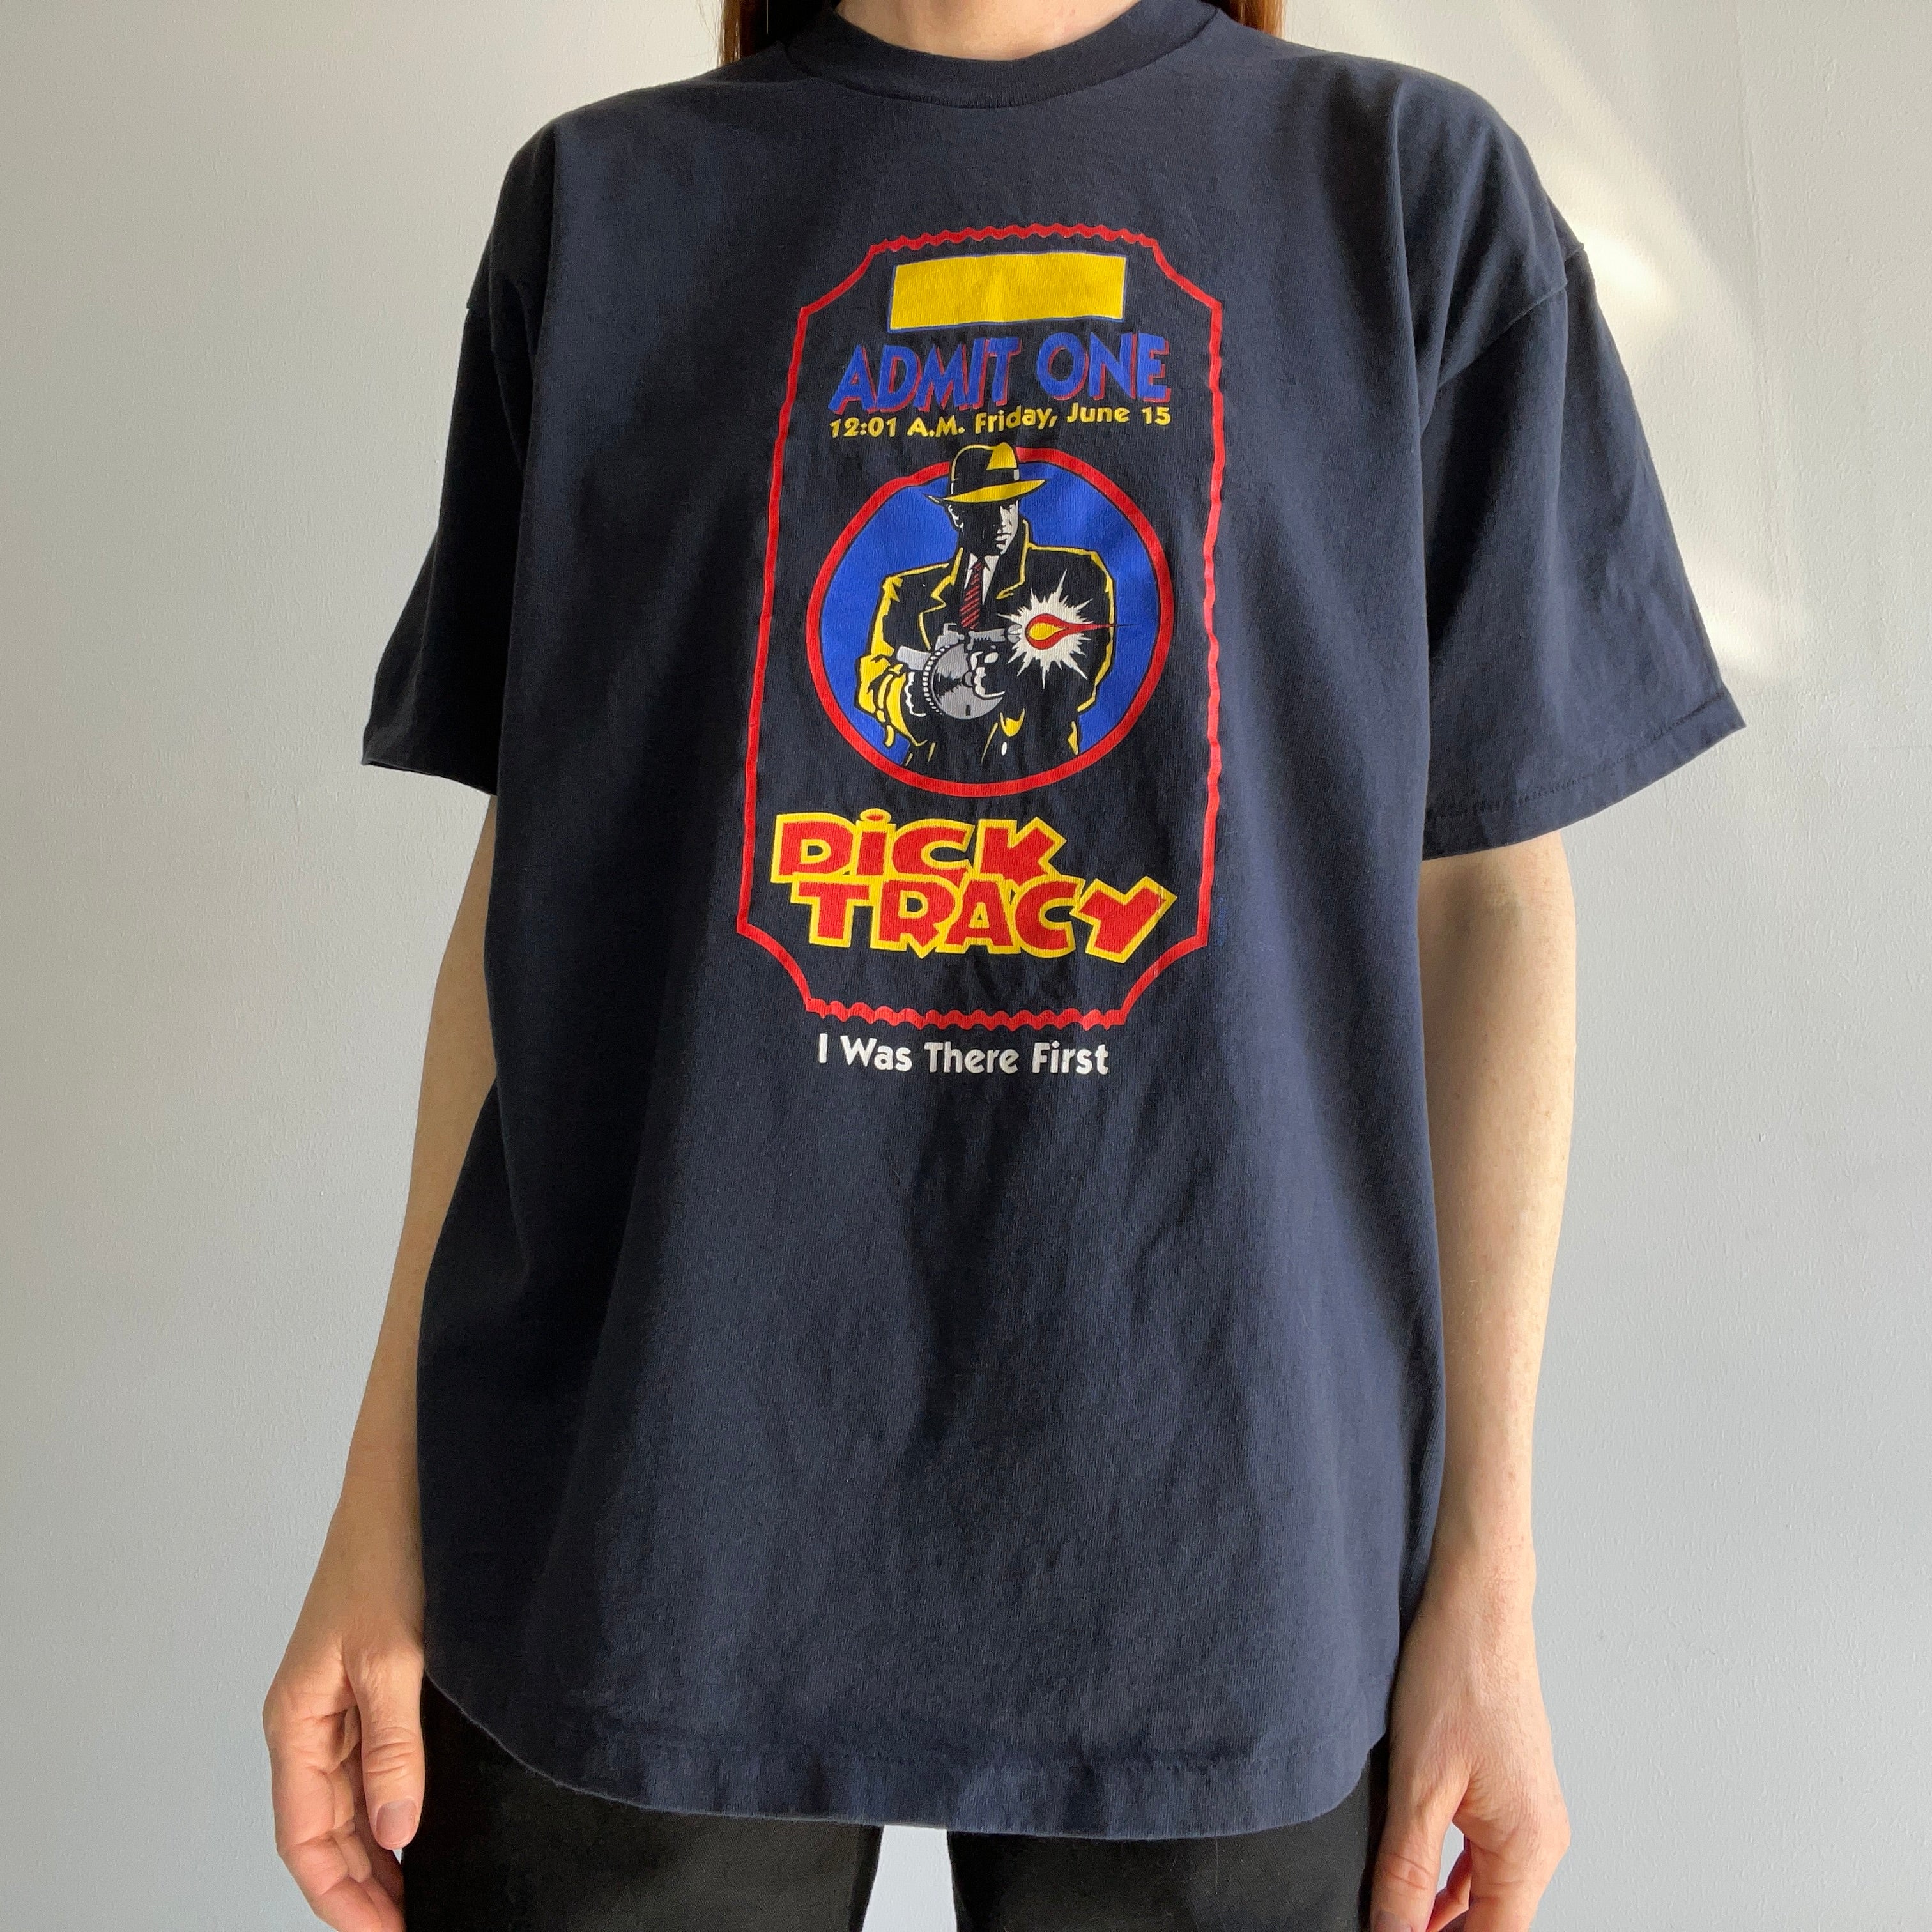 1990 DIck Tracy Admit One T-Shirt